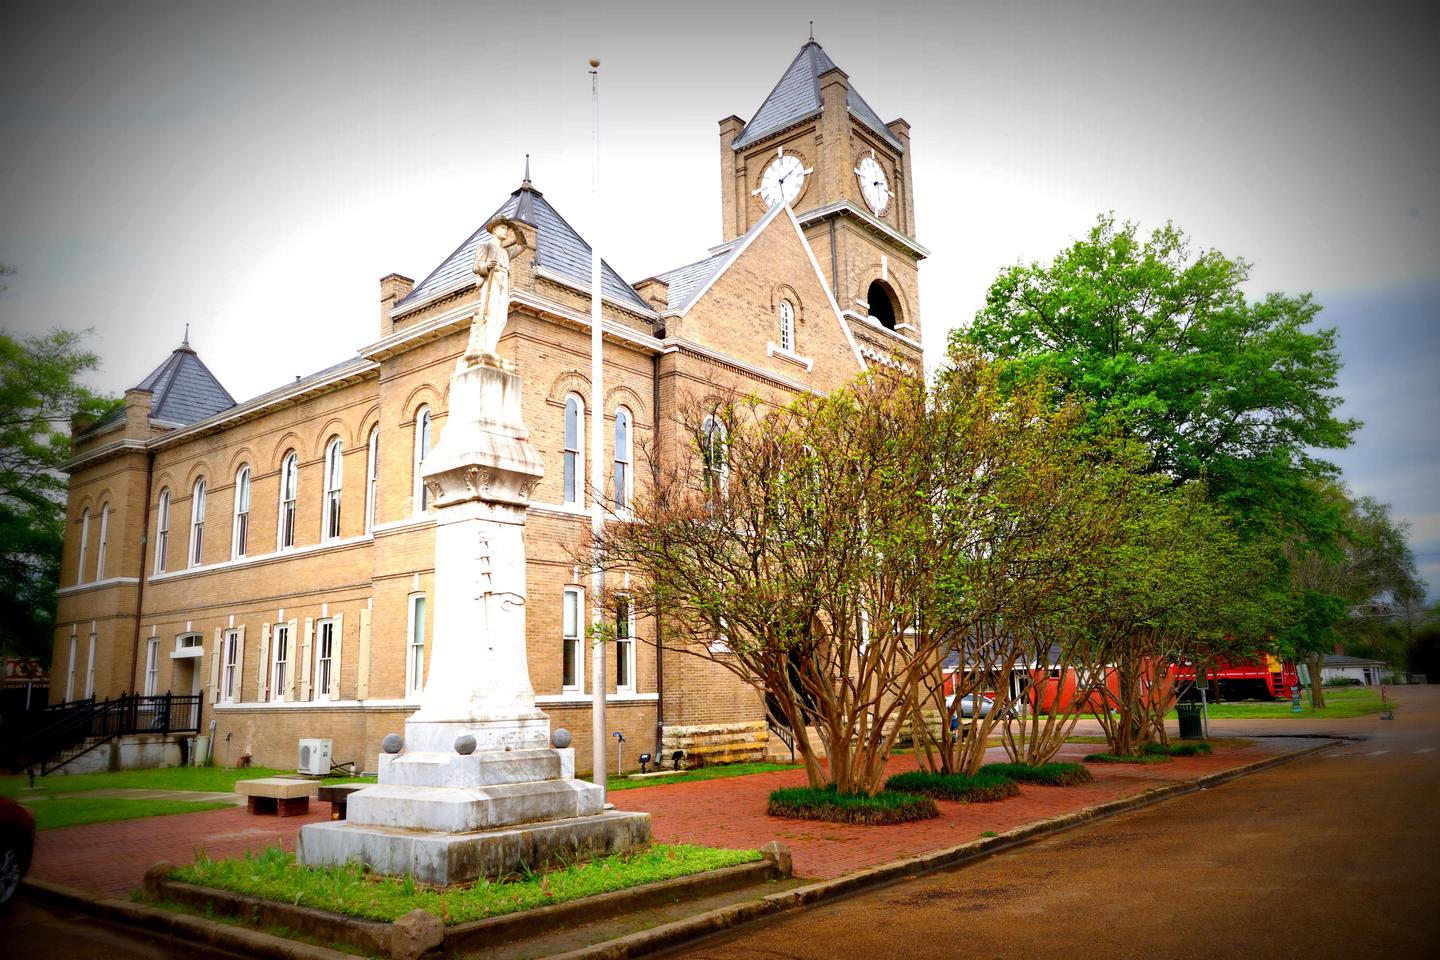 Tallahatchie County CourthouseThe Tallahatchie County Courthouse in Sumner, MS.